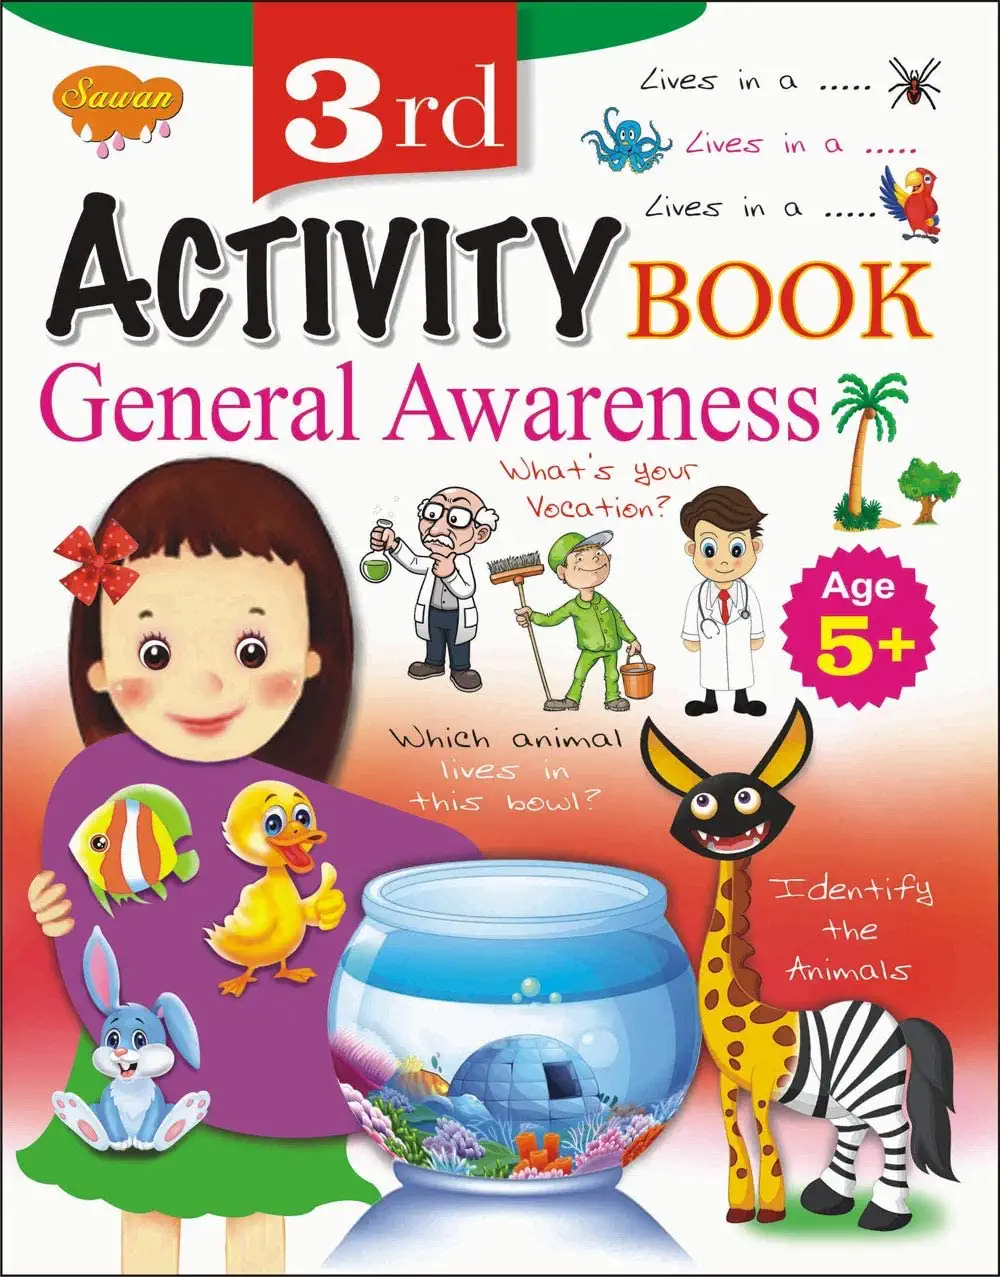 3rd Activity Book-General Knowledge 